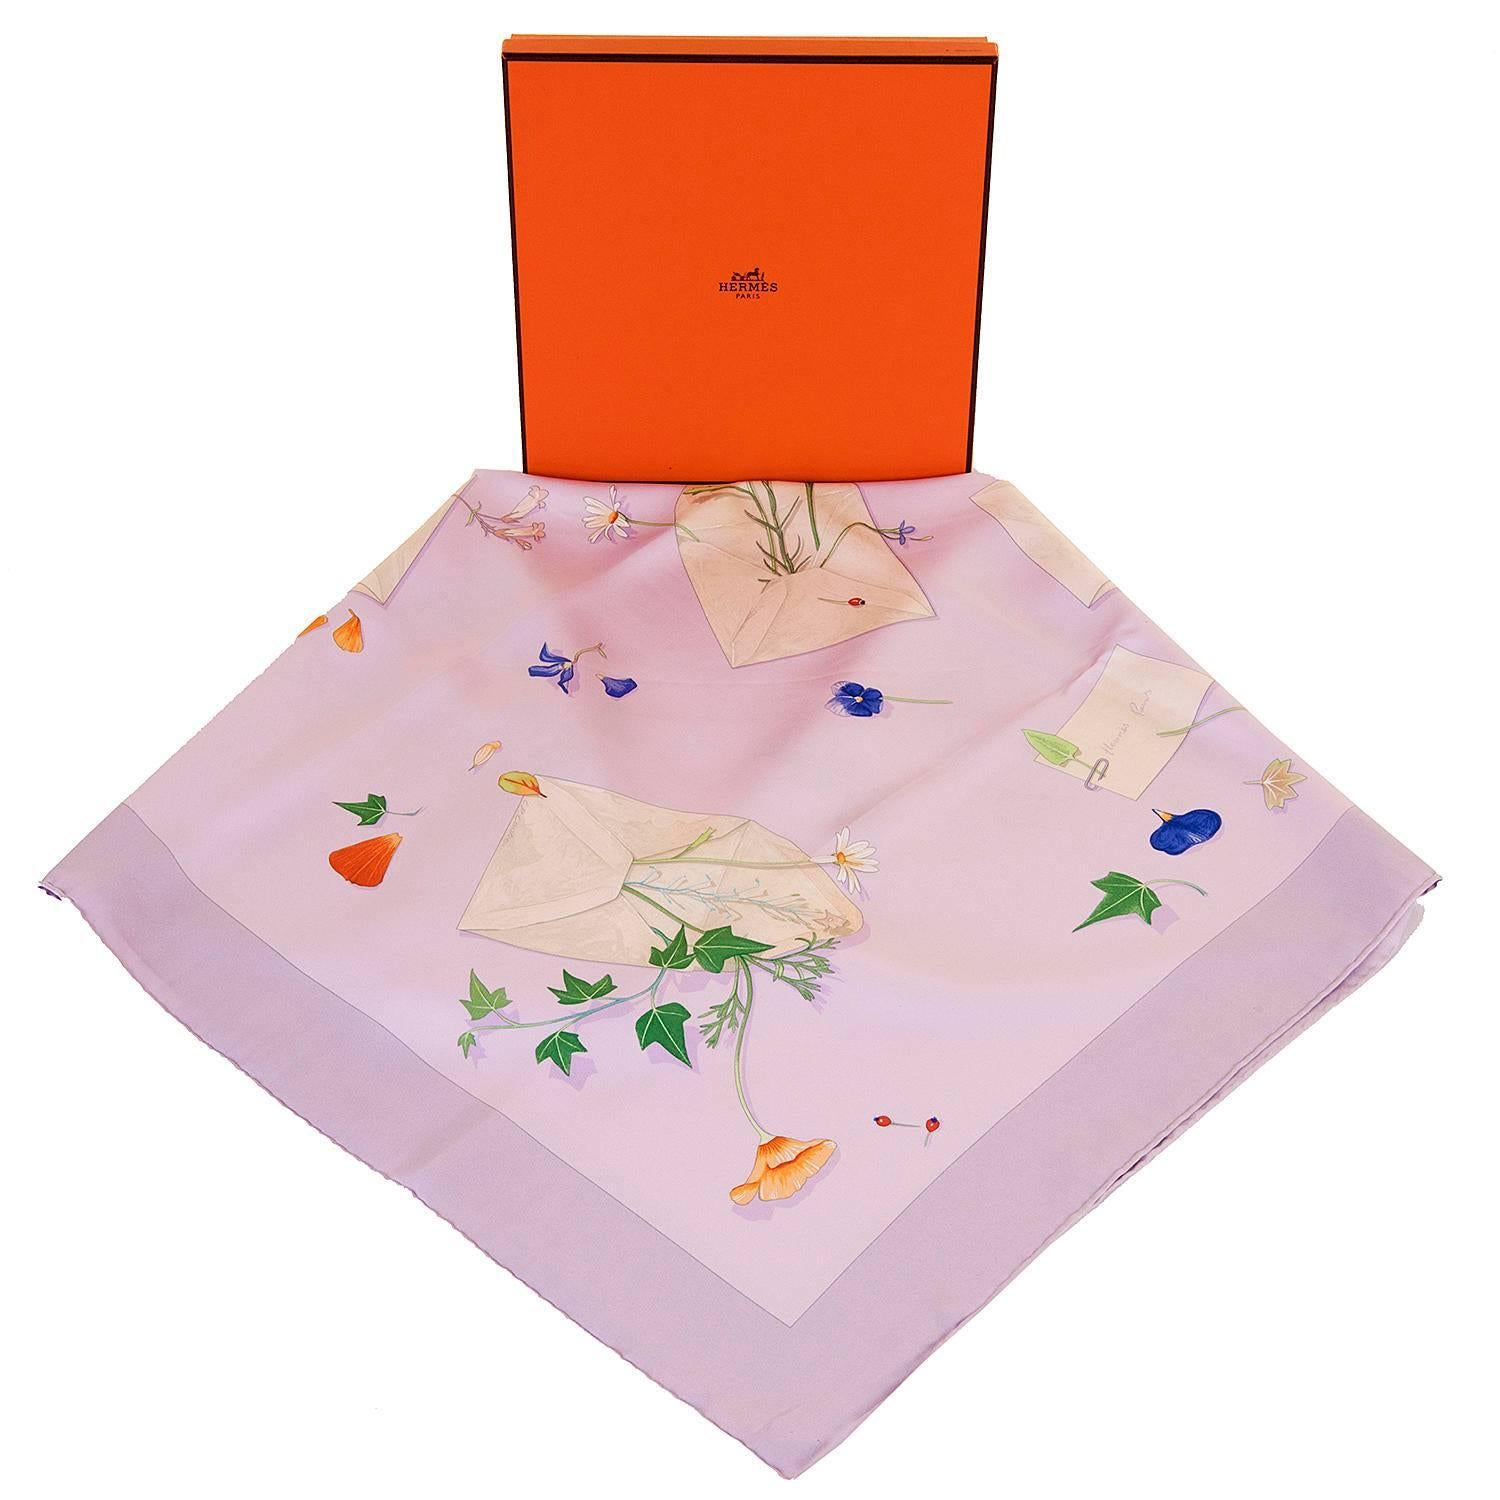 A beautiful Hermes Silk Scarf, 'Des Fleurs pour le Dire', by Leigh P. Cooke. Designed in 2005, this Hermes Scarf is in 'store-fresh' condition, unused and unworn and comes with it's original Hermes box.